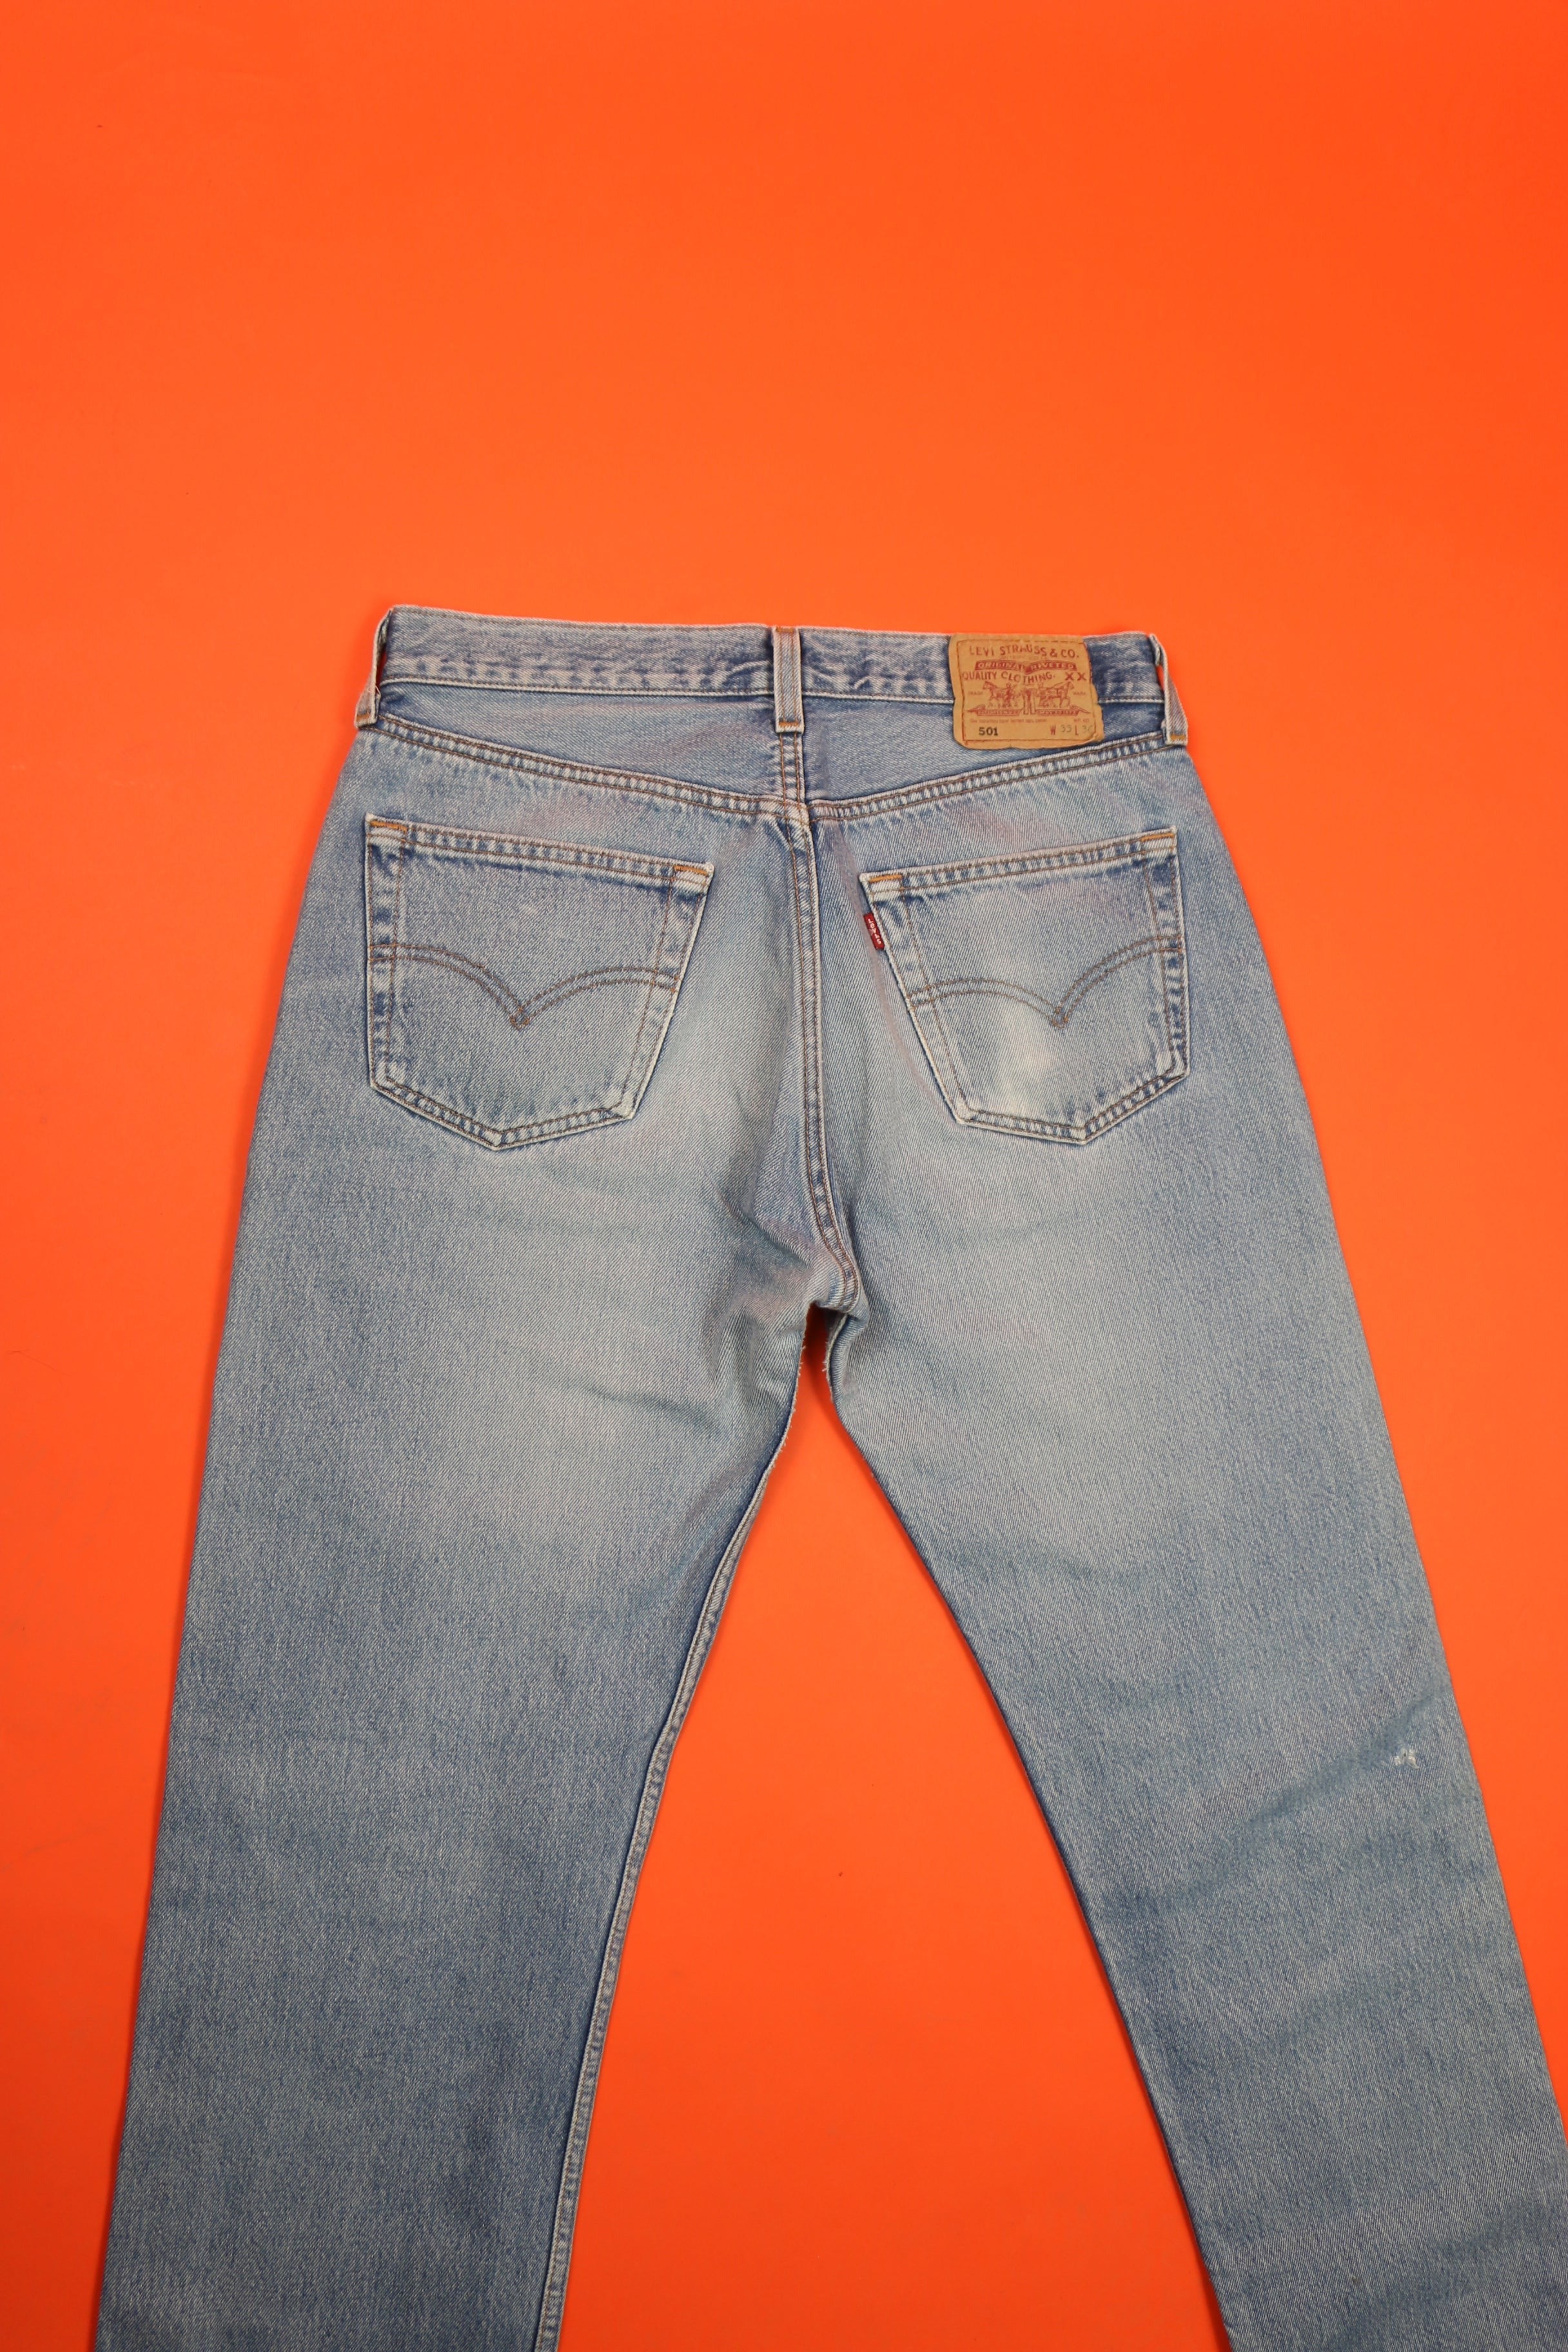 Levi's 501 Jeans Made in U.S.A. 'W33 L36' ~ Vintage Store